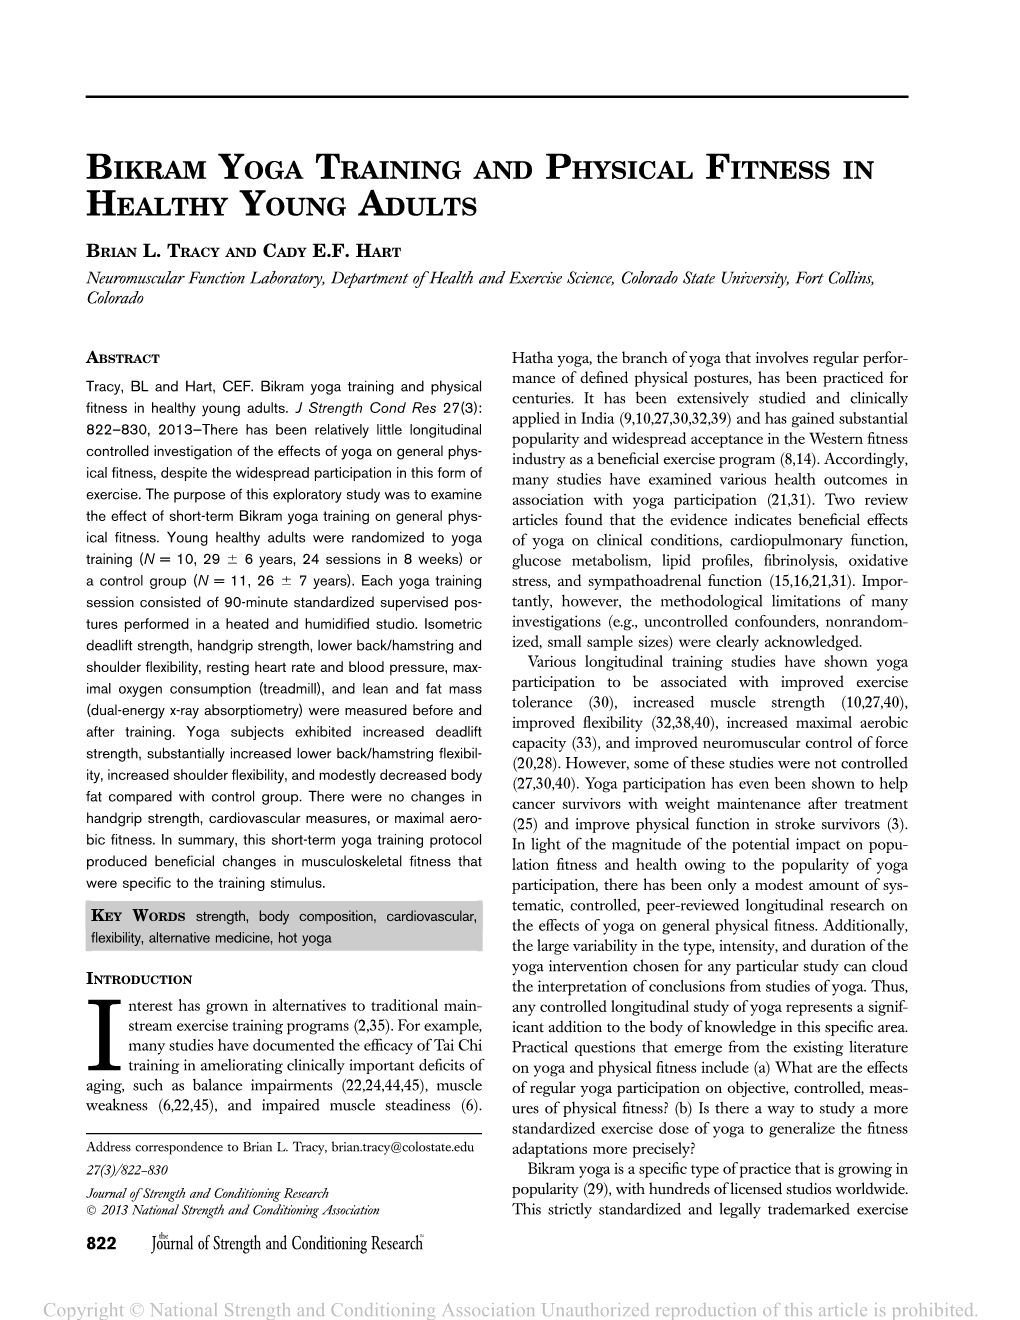 Bikram Yoga Training and Physical Fitness in Healthy Young Adults